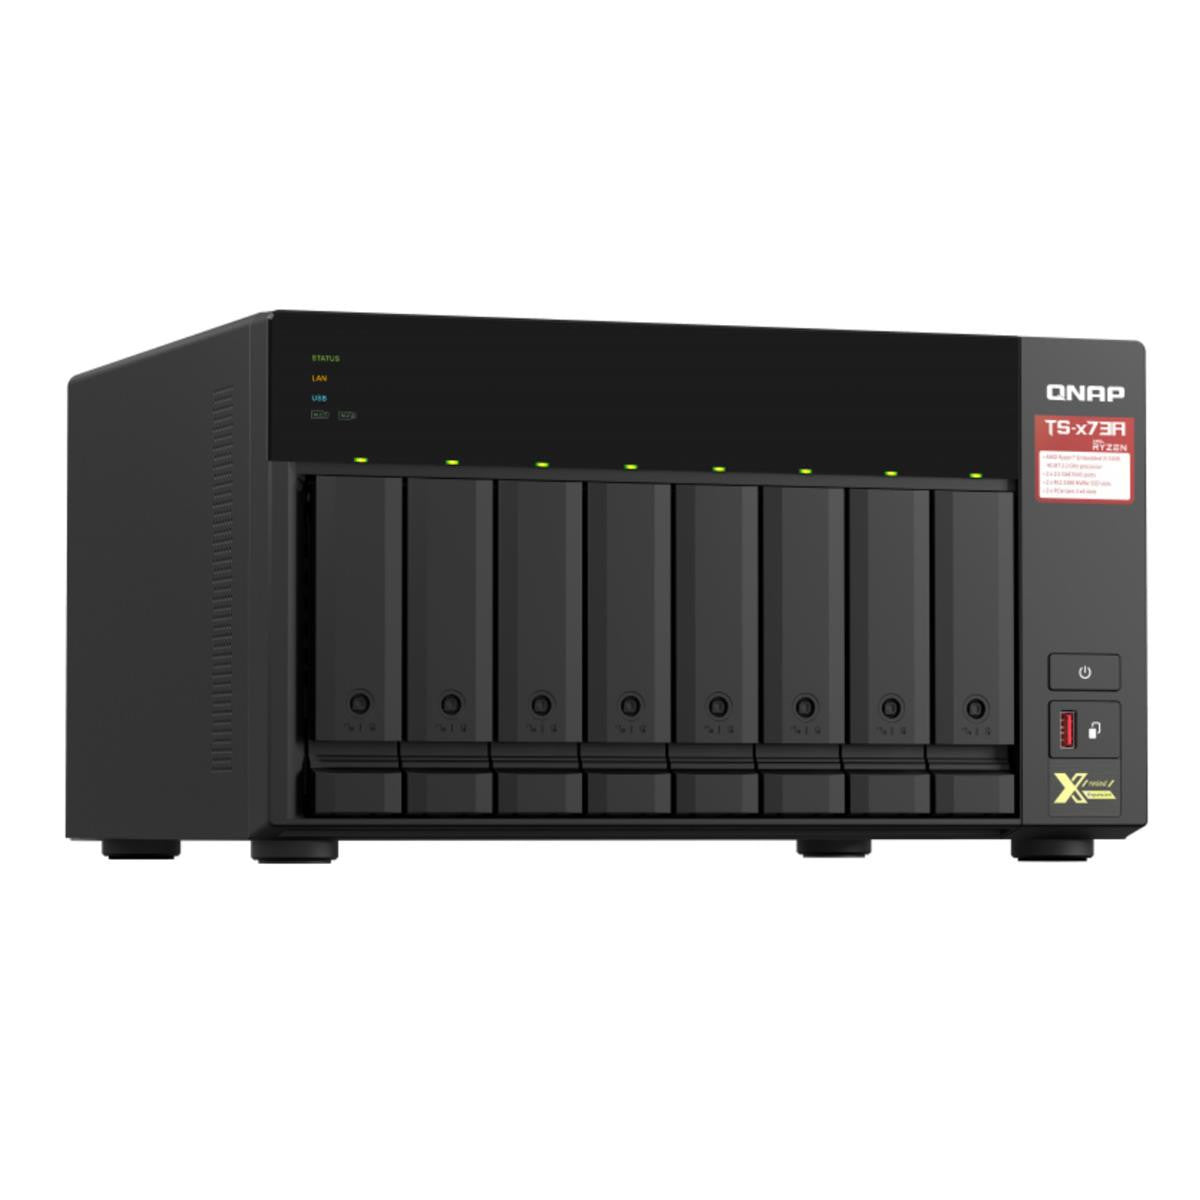 QNAP TS-873A 8-BAY NAS with 16GB DDR4 RAM and 48TB (8x6TB) Seagate Ironwolf NAS Drives Fully Assembled and Tested